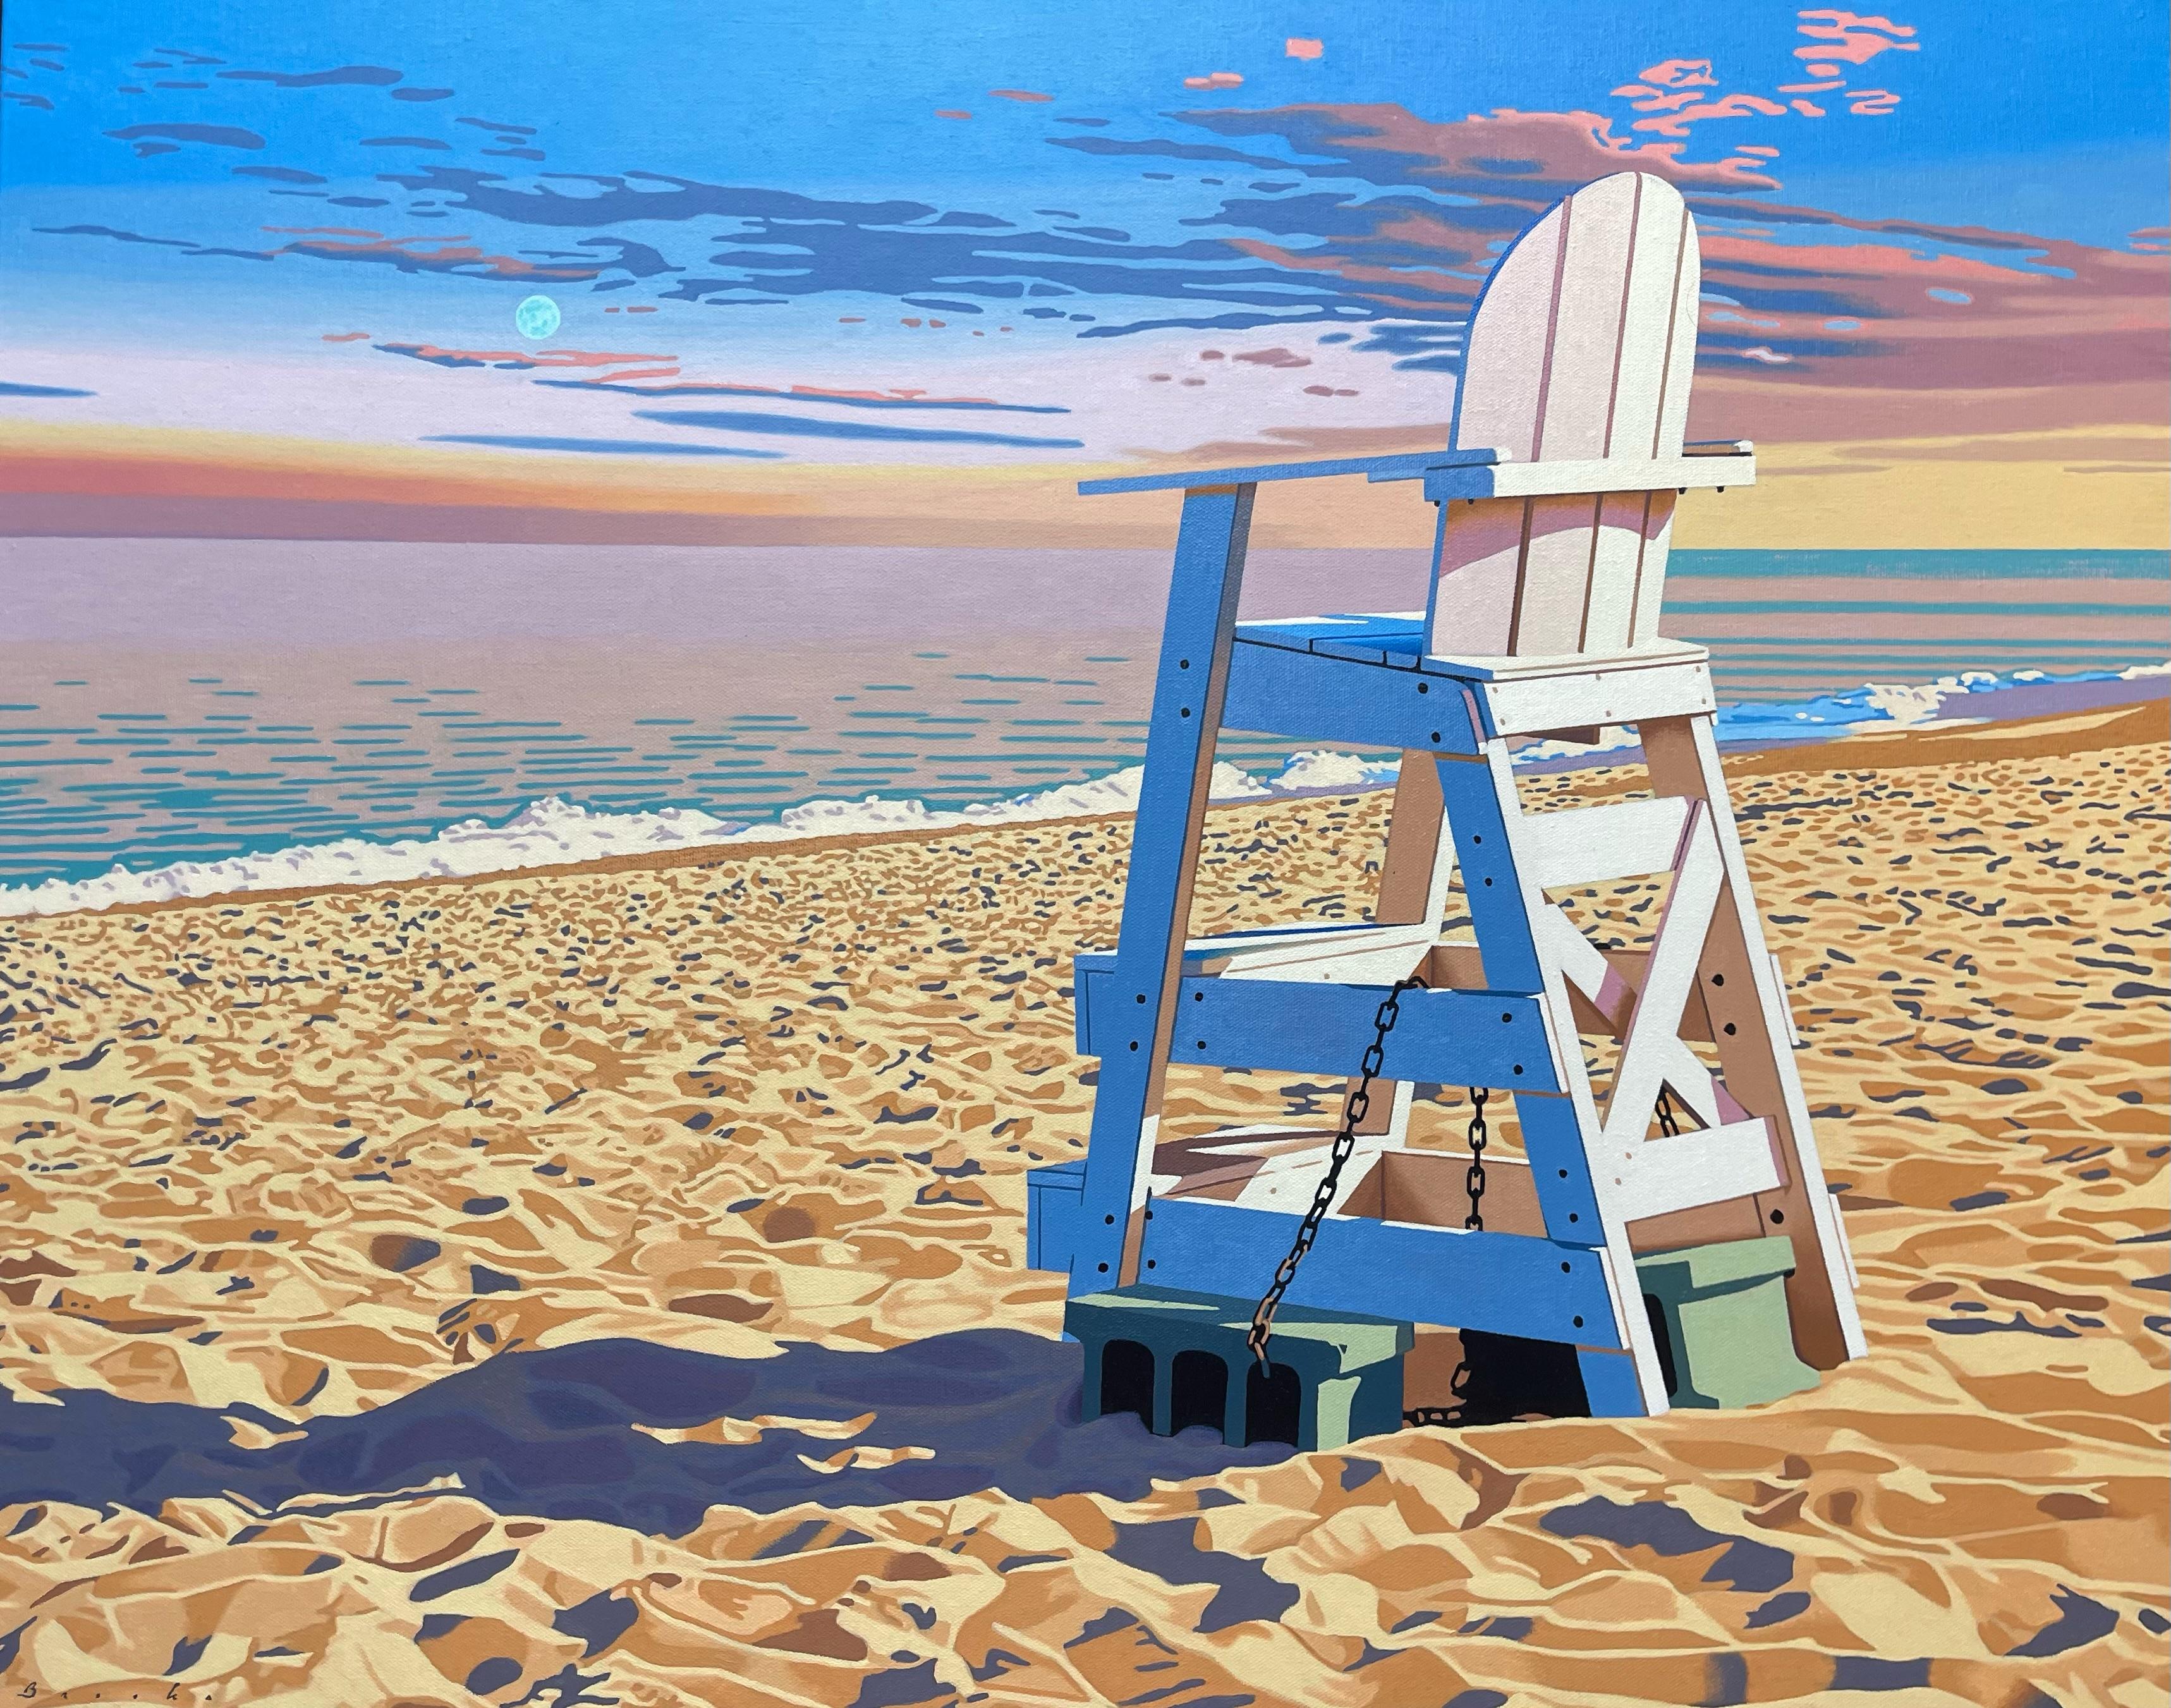 Rob Brooks Landscape Painting - "Lifeguard Chair" photorealist oil painting of a white lifeguard stand on beach